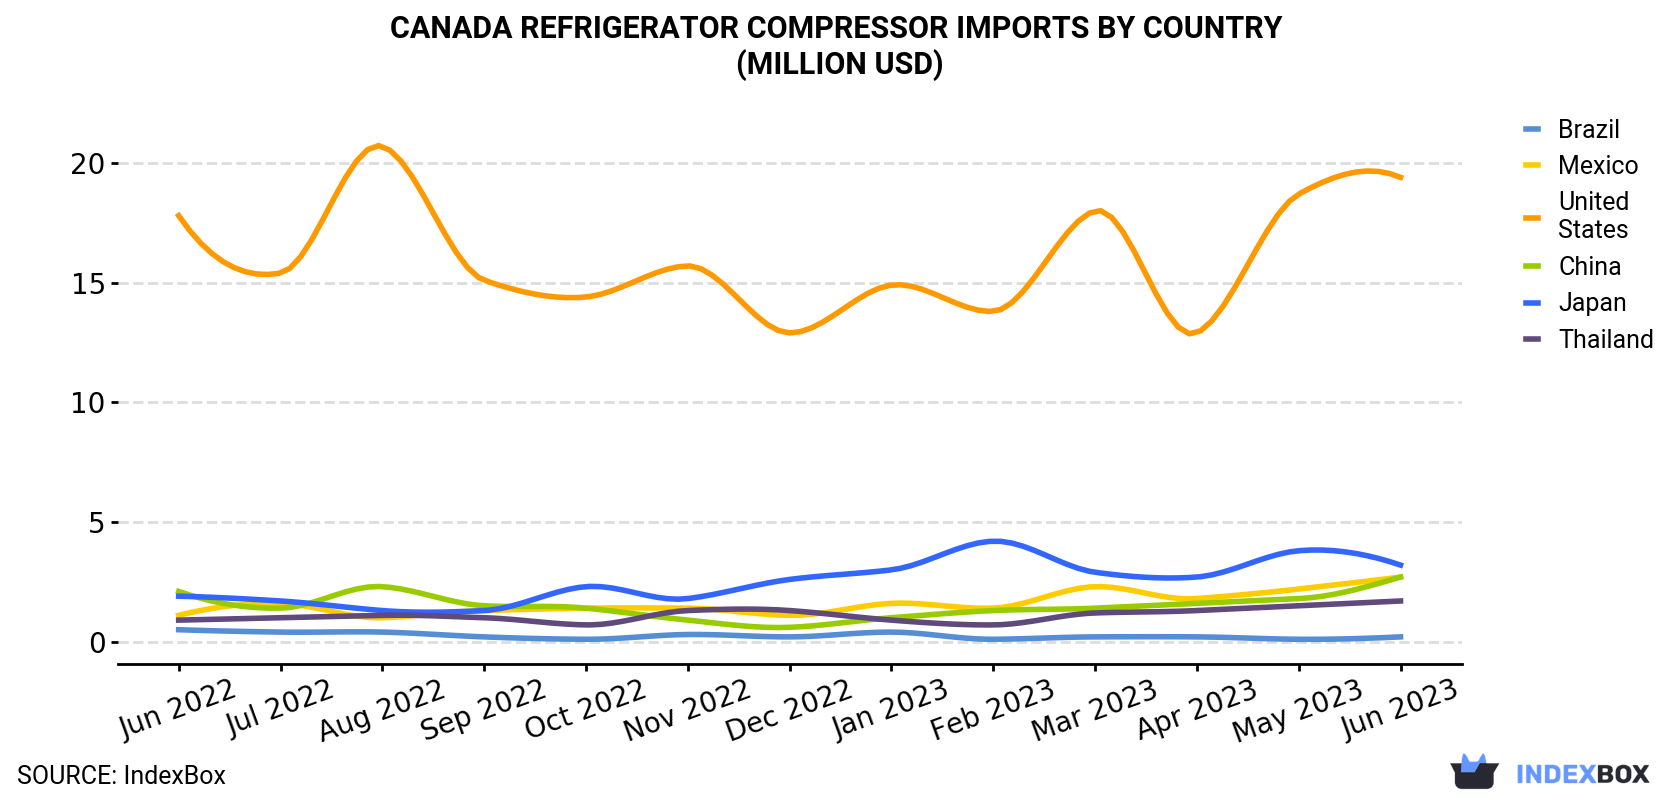 Canada Refrigerator Compressor Imports By Country (Million USD)